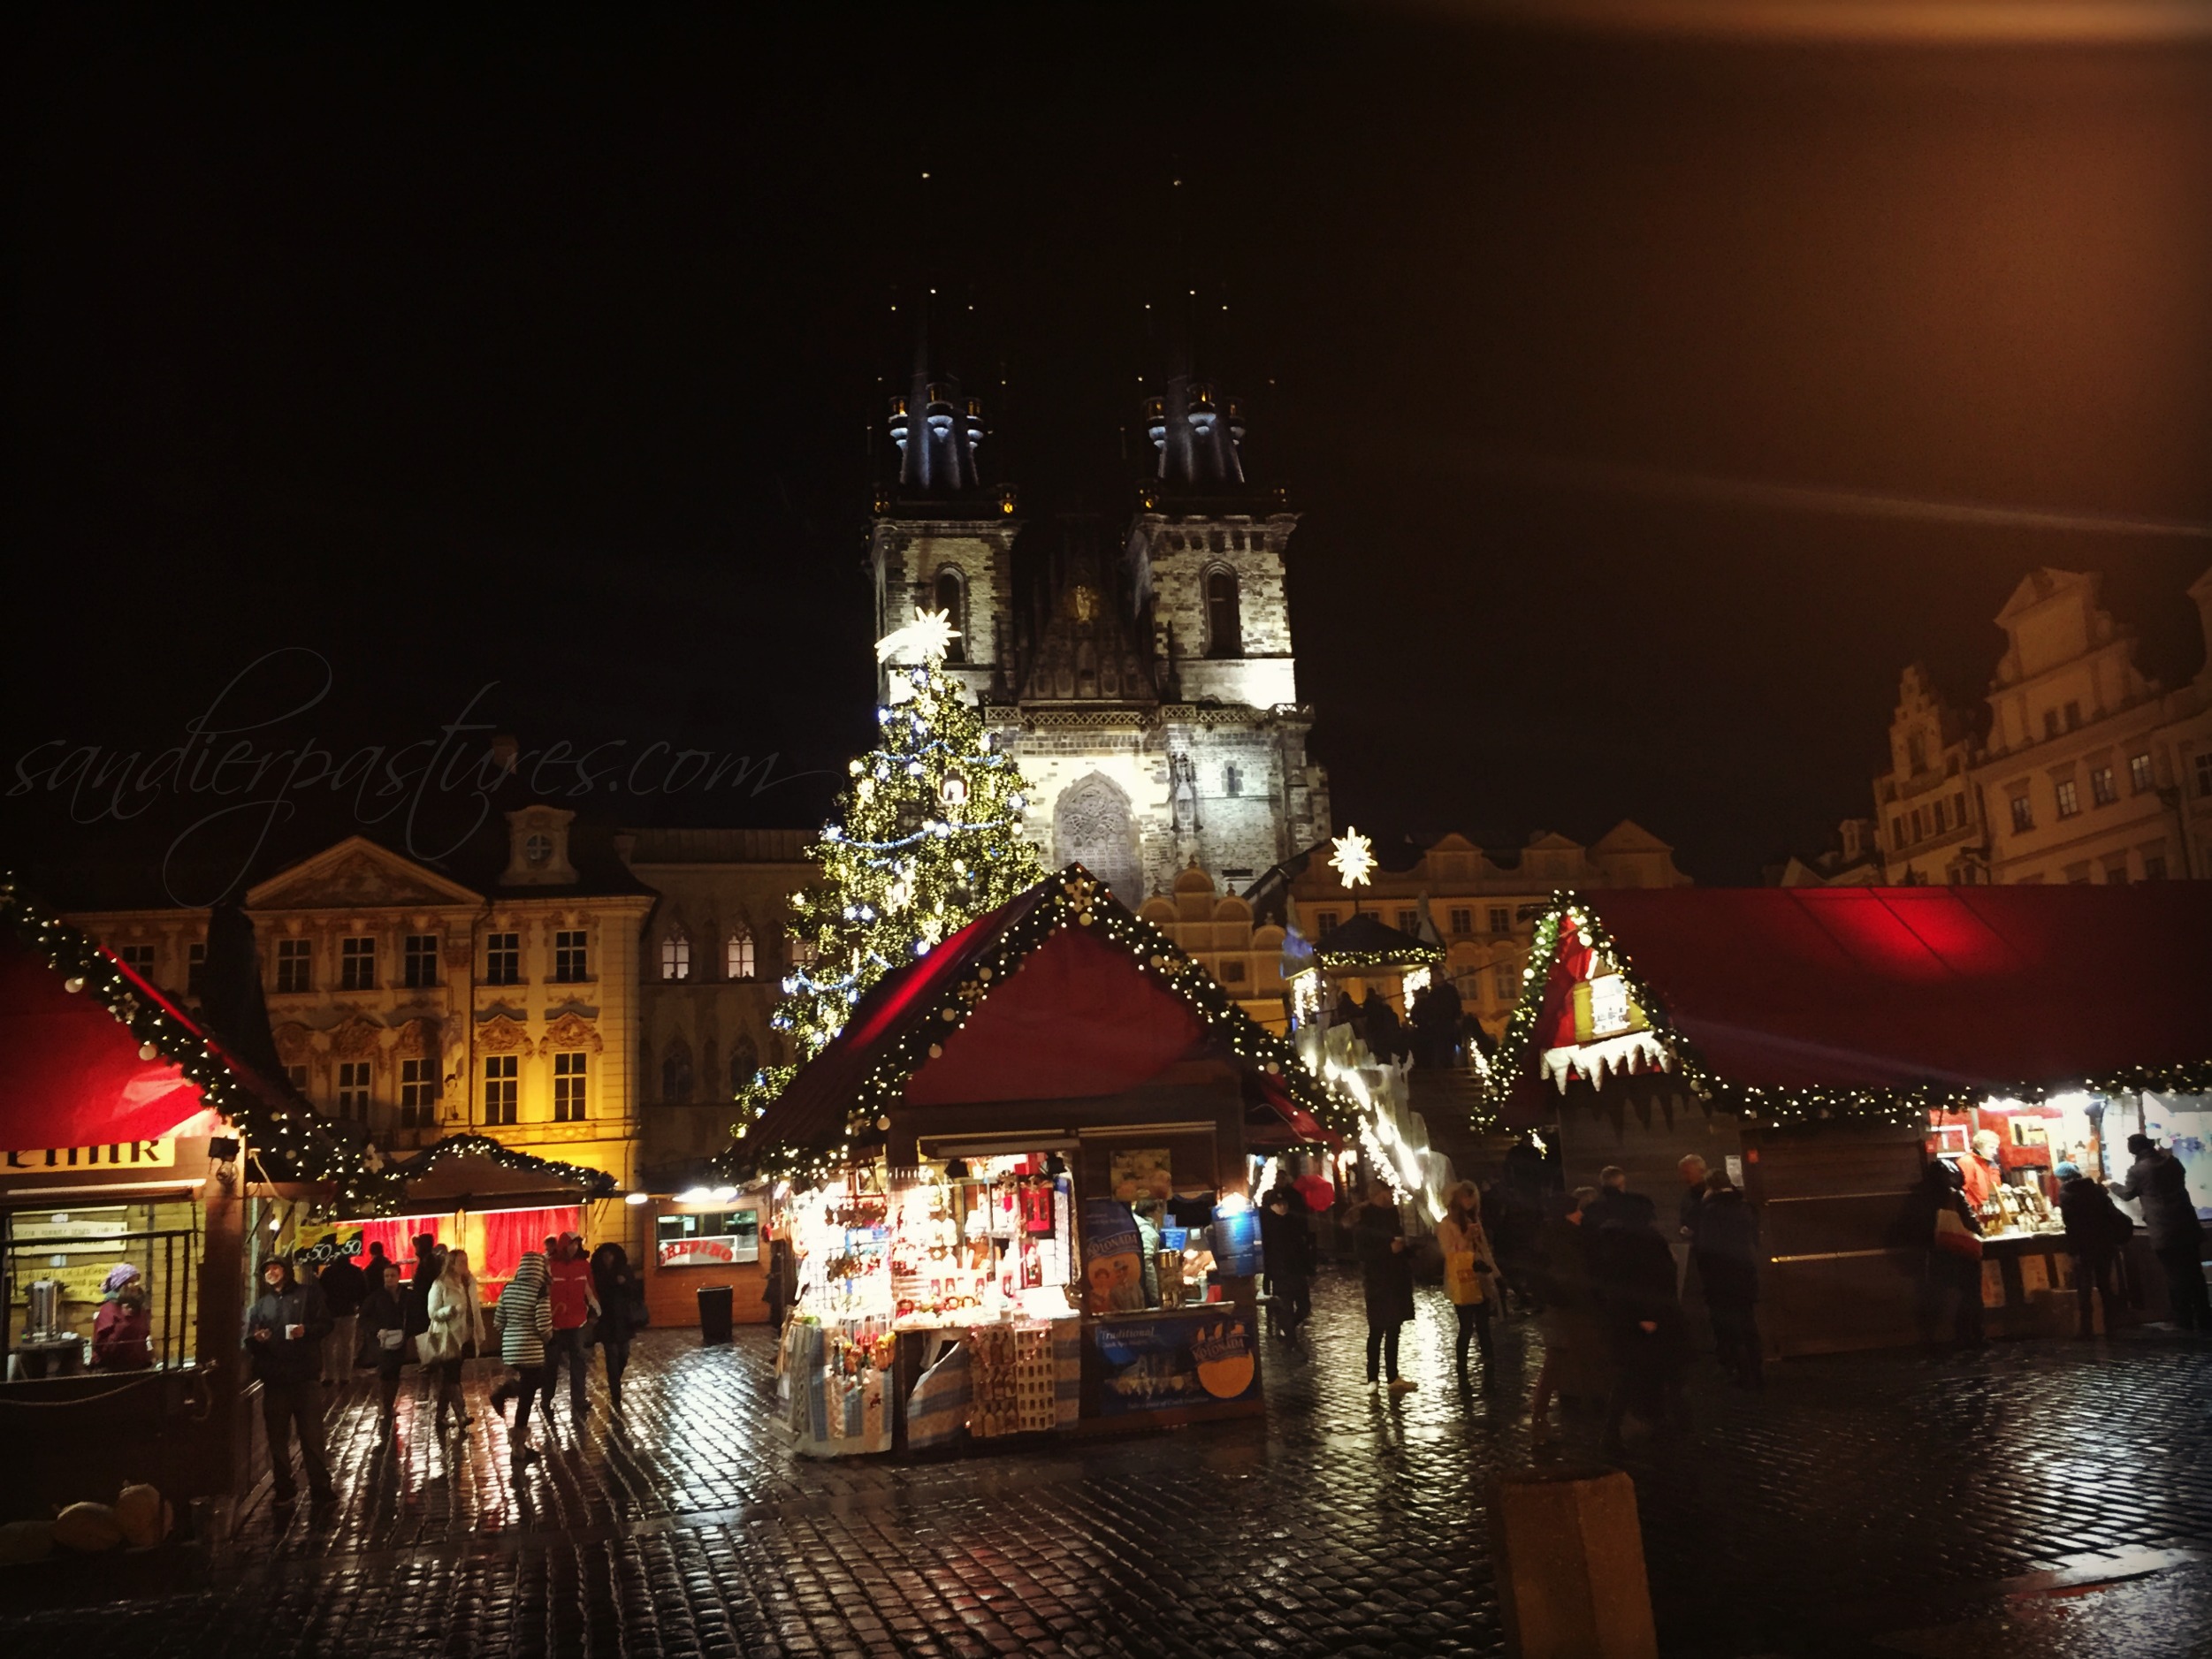 First Christmas market experience in Prague!